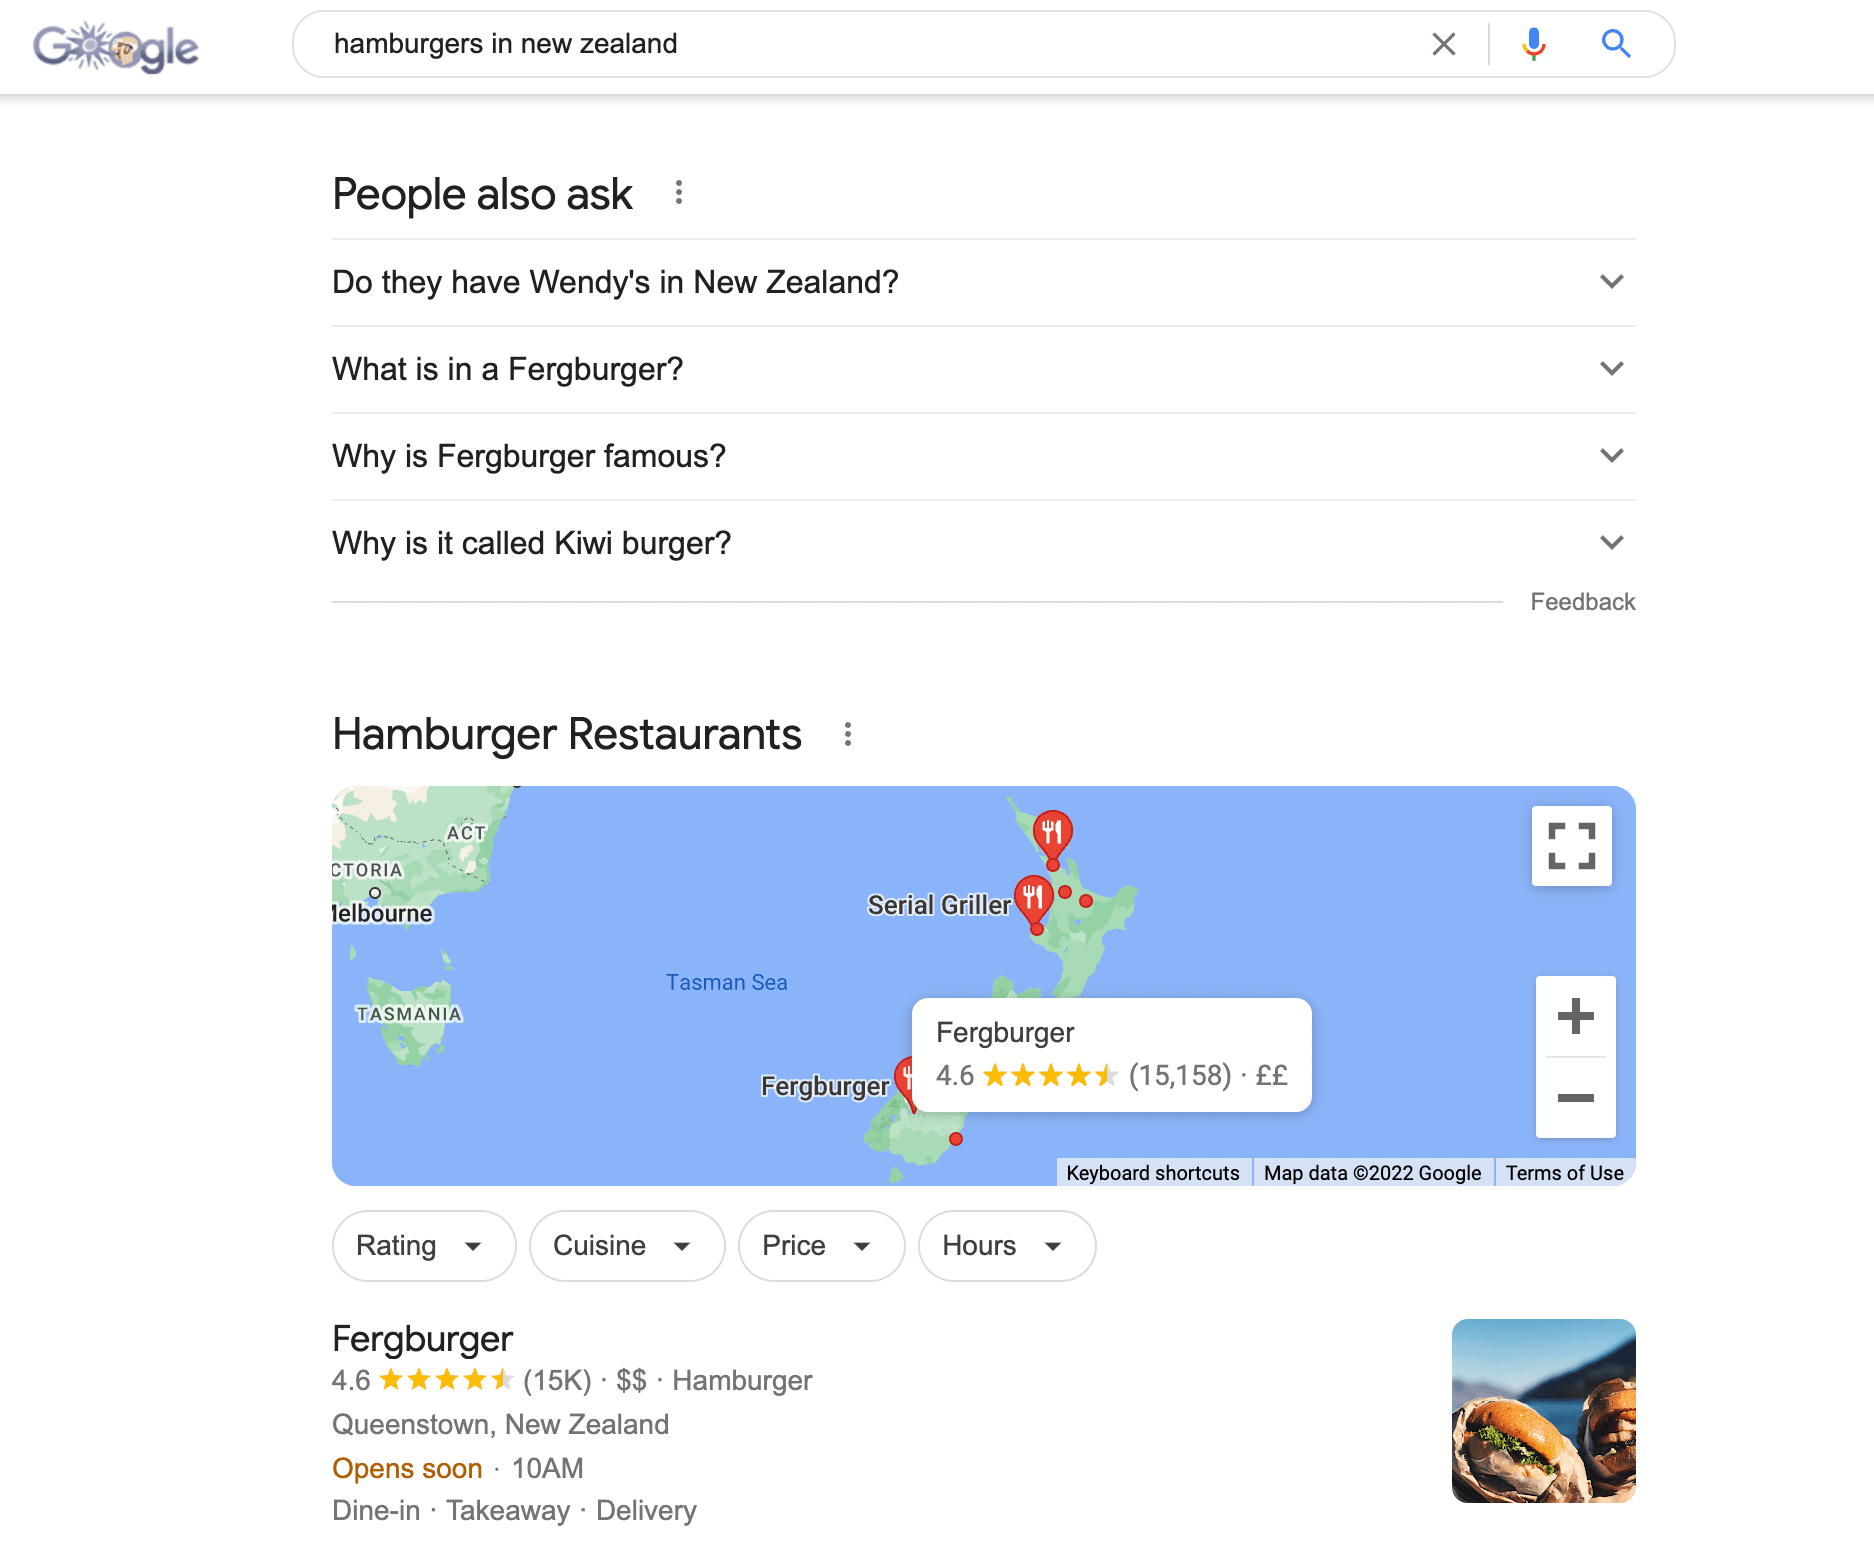 Google results for hamburgers in New Zealand with Fergburger as the first result